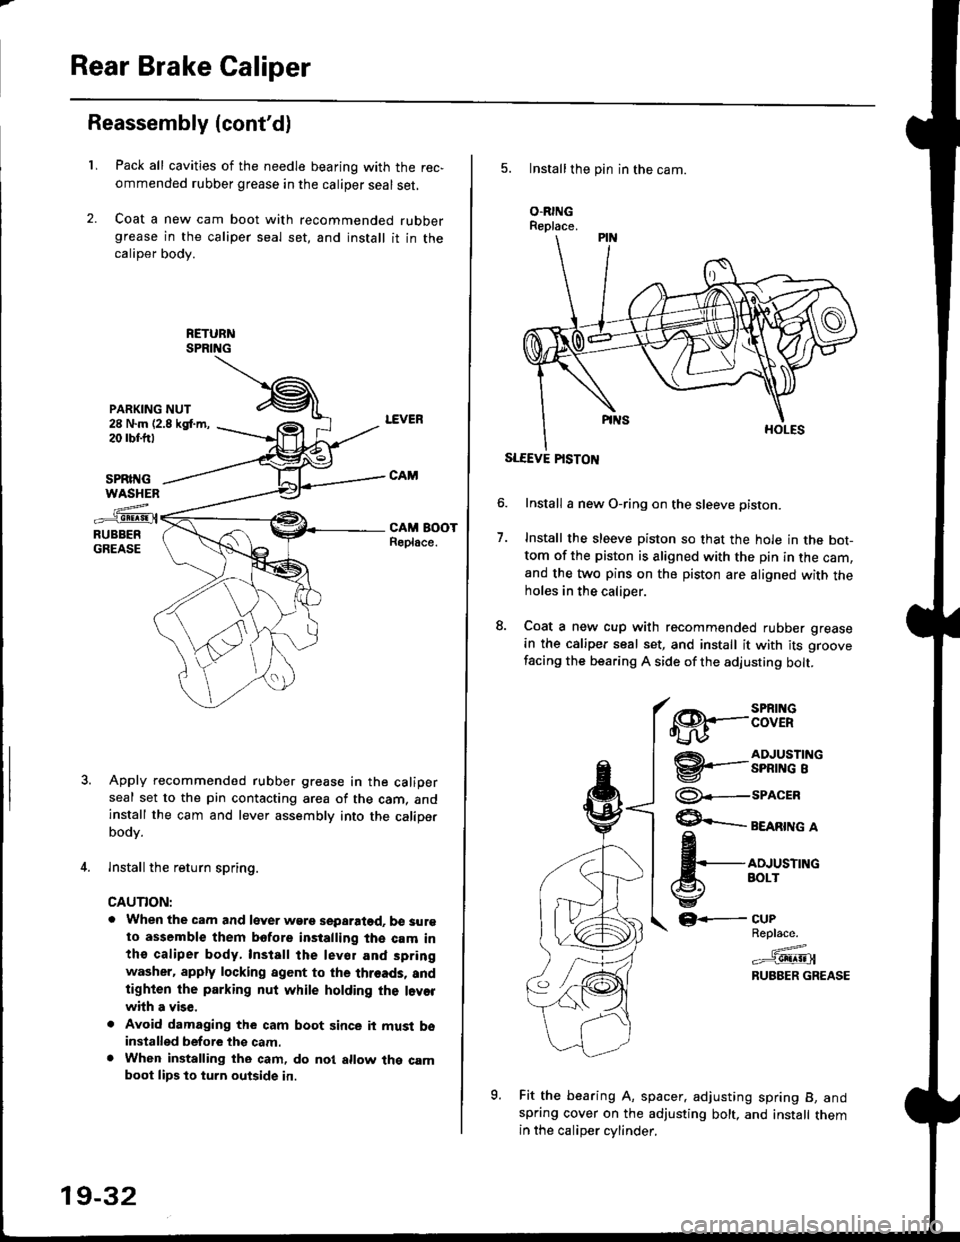 HONDA CIVIC 1996 6.G Owners Guide Rear Brake Caliper
Reassembly (contdl
L
PARKING NUT28 N.m (2.8 kgt m,20 rbr.trt
Pack all cavities of the needle bearing with the rec,
ommended rubber grease in the caliper seal set,
Coat a new cam bo